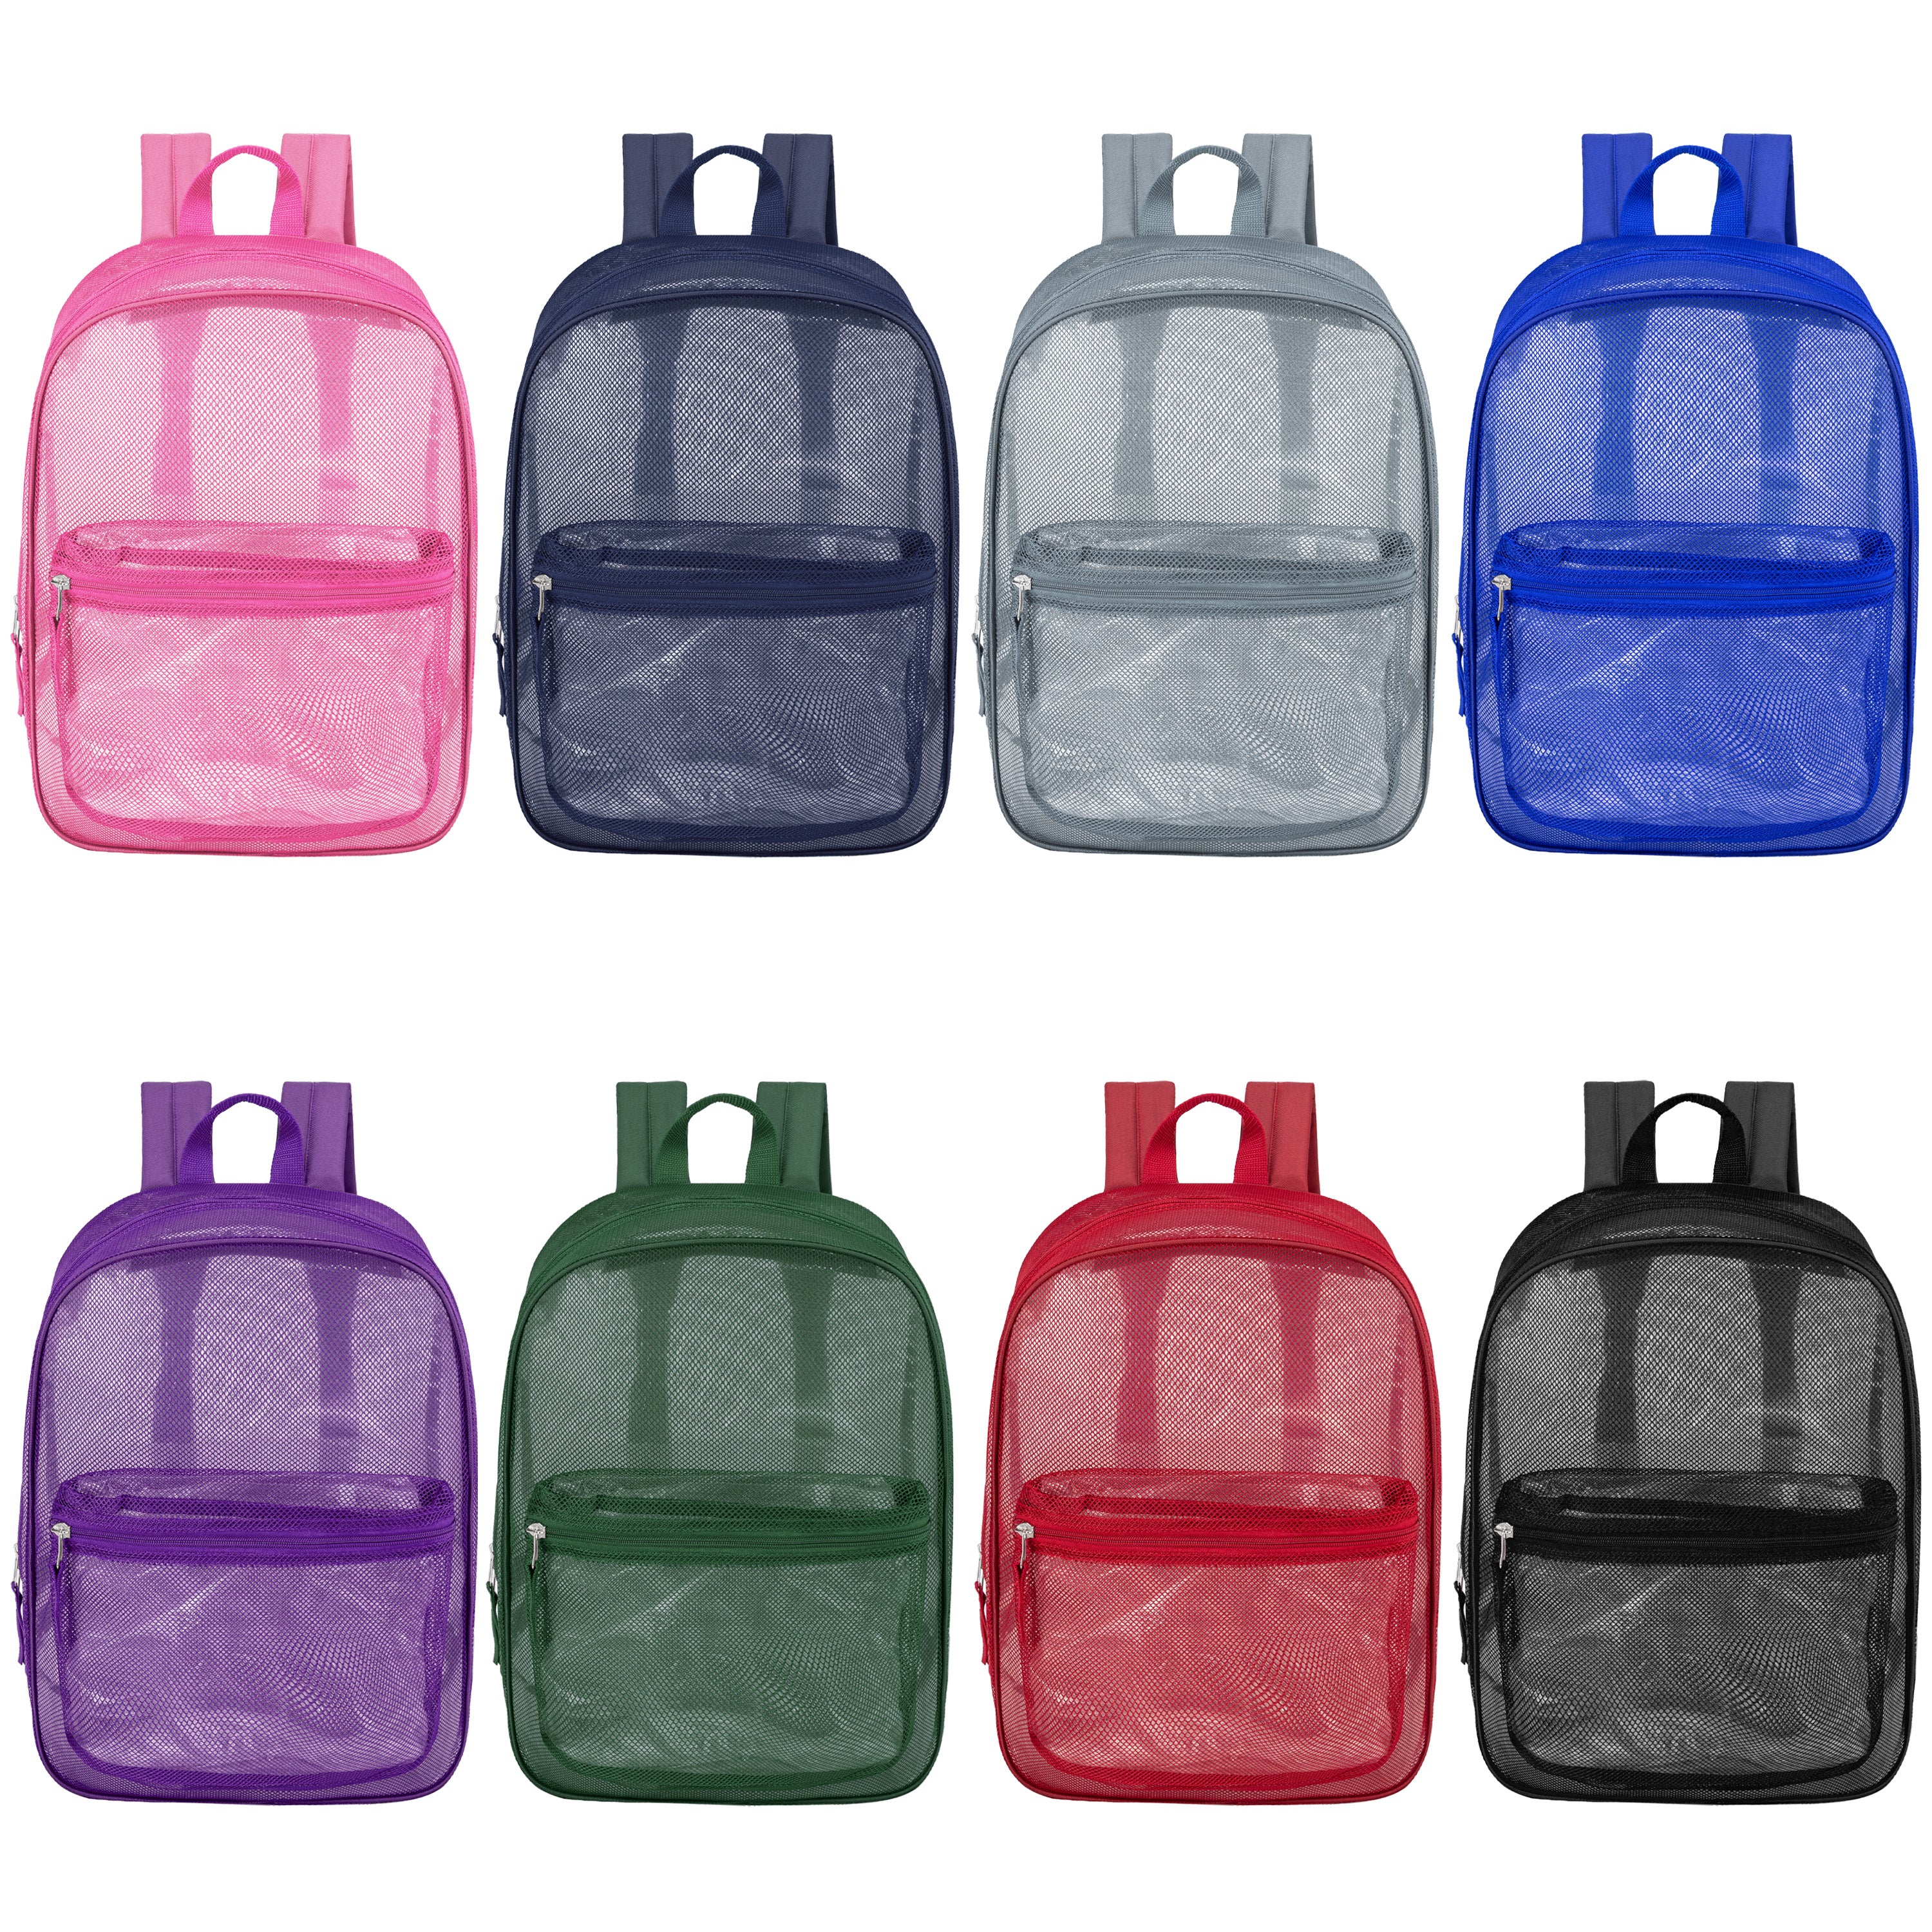 17" Wholesale Mesh Assorted Colors Backpack in 8 Colors - Bulk Case of 24 Backpacks